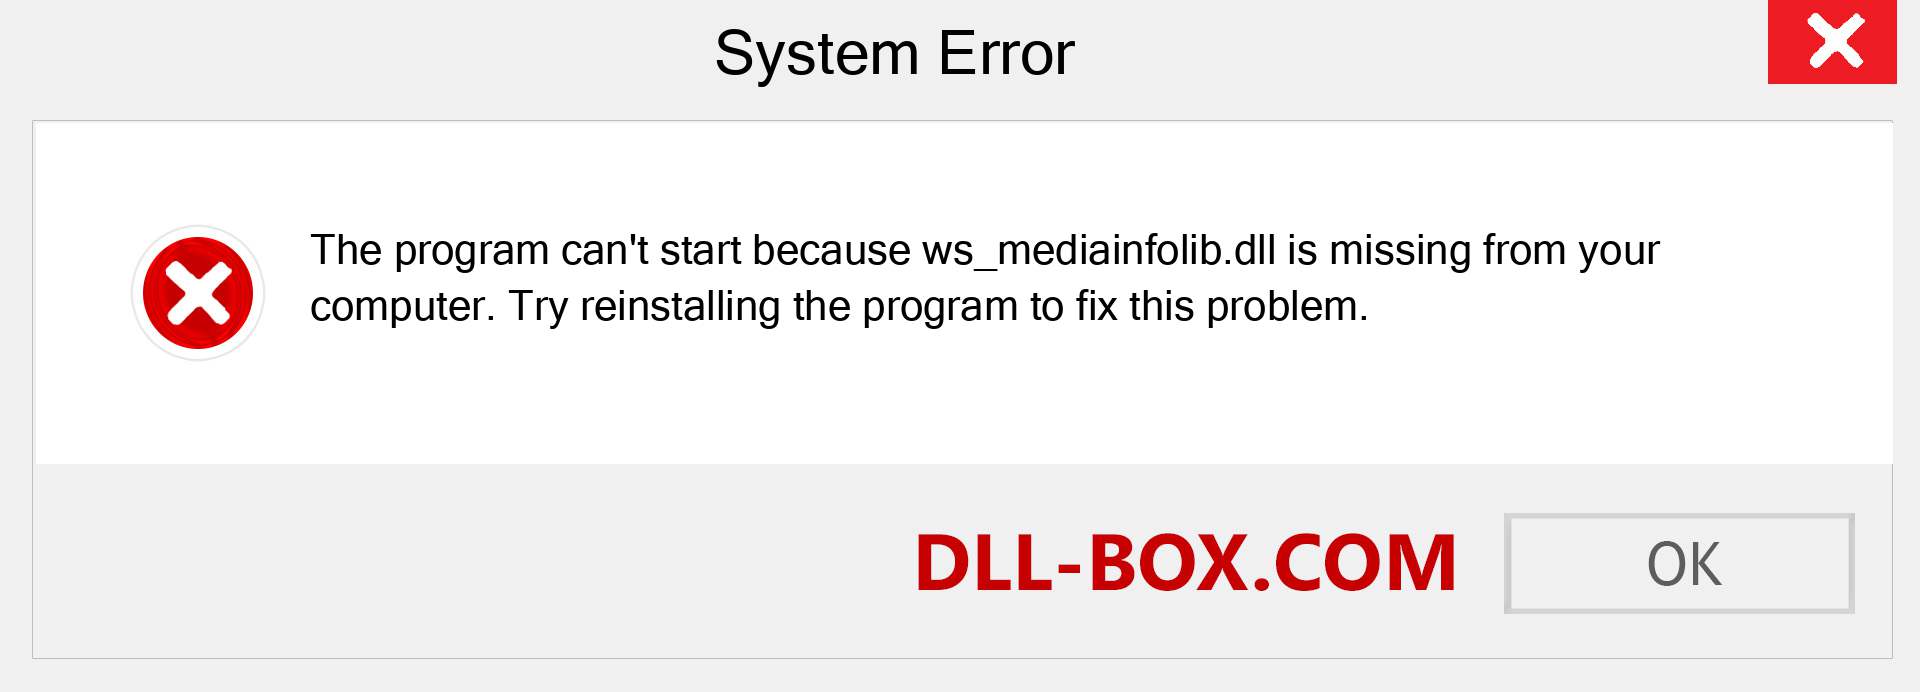  ws_mediainfolib.dll file is missing?. Download for Windows 7, 8, 10 - Fix  ws_mediainfolib dll Missing Error on Windows, photos, images